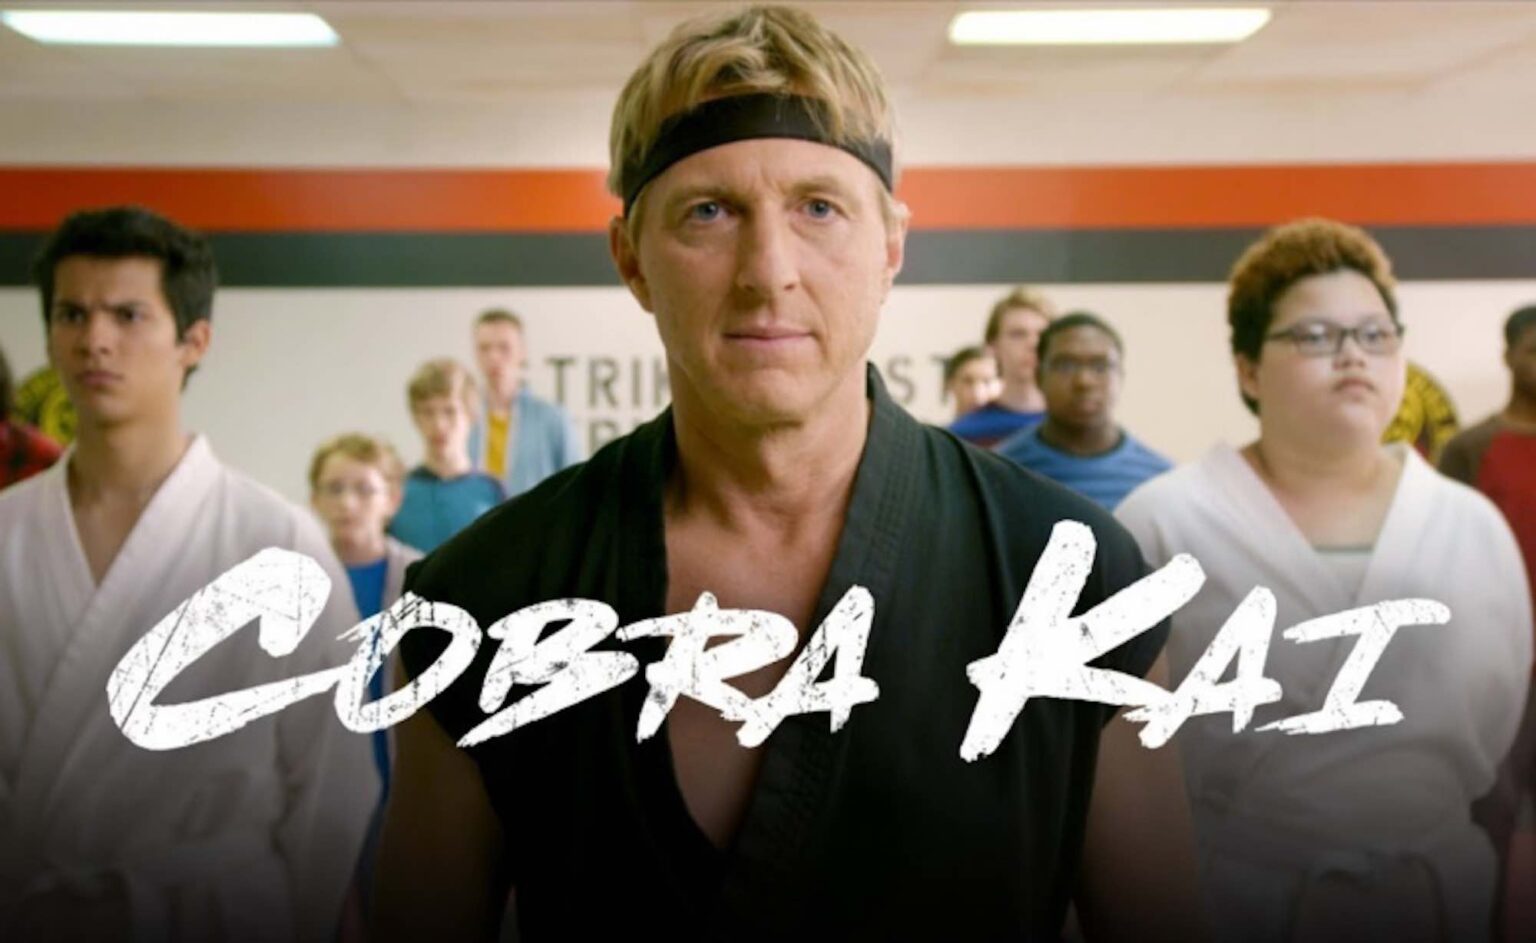 Are you in love with the 'Karate Kid' sequel series 'Cobra Kai'? Dive into the fan theories in the lead-up to season 4.